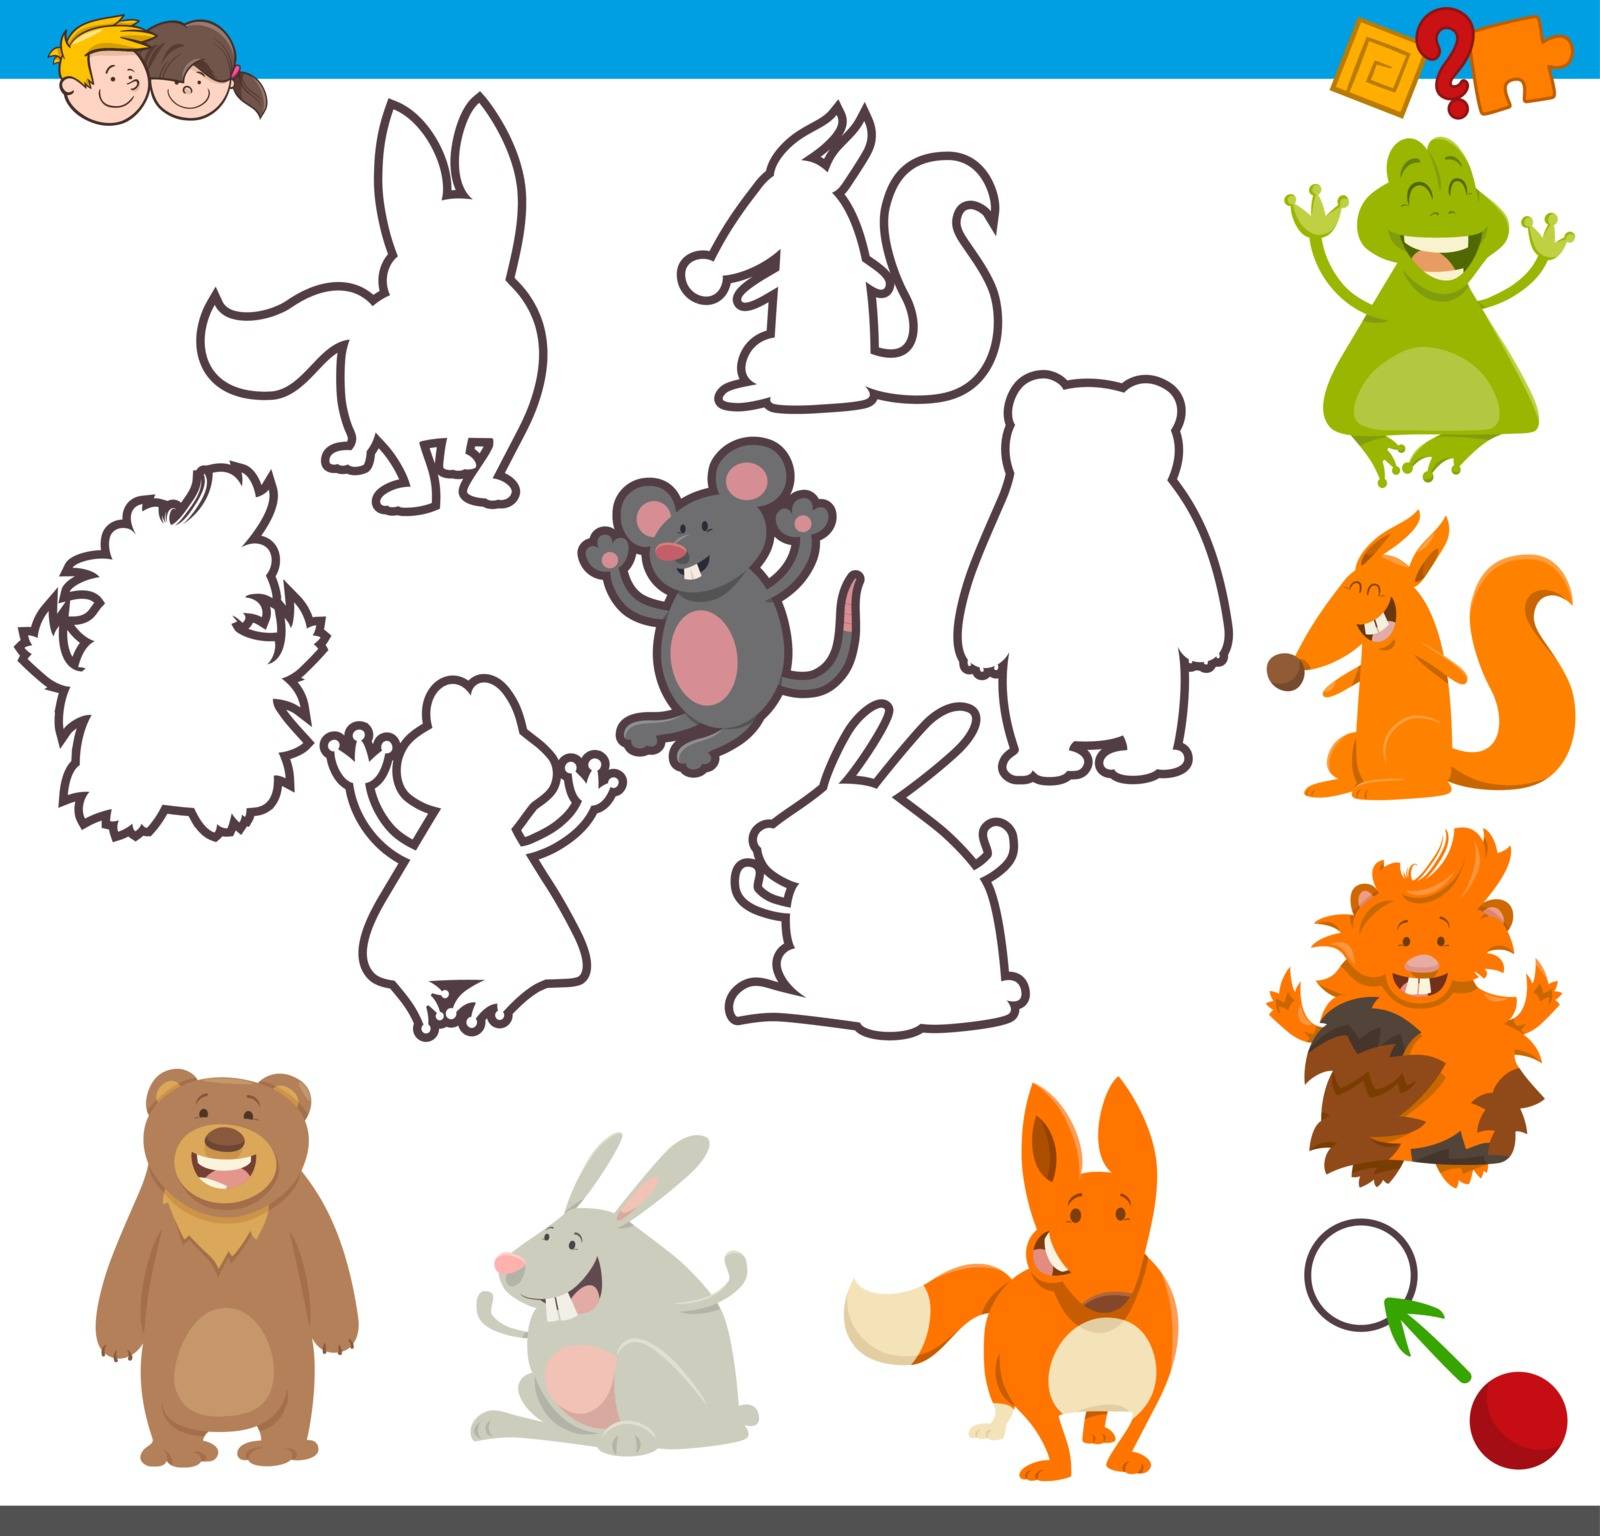 Cartoon Illustration of Educational Activity Game for Children with Animal Characters